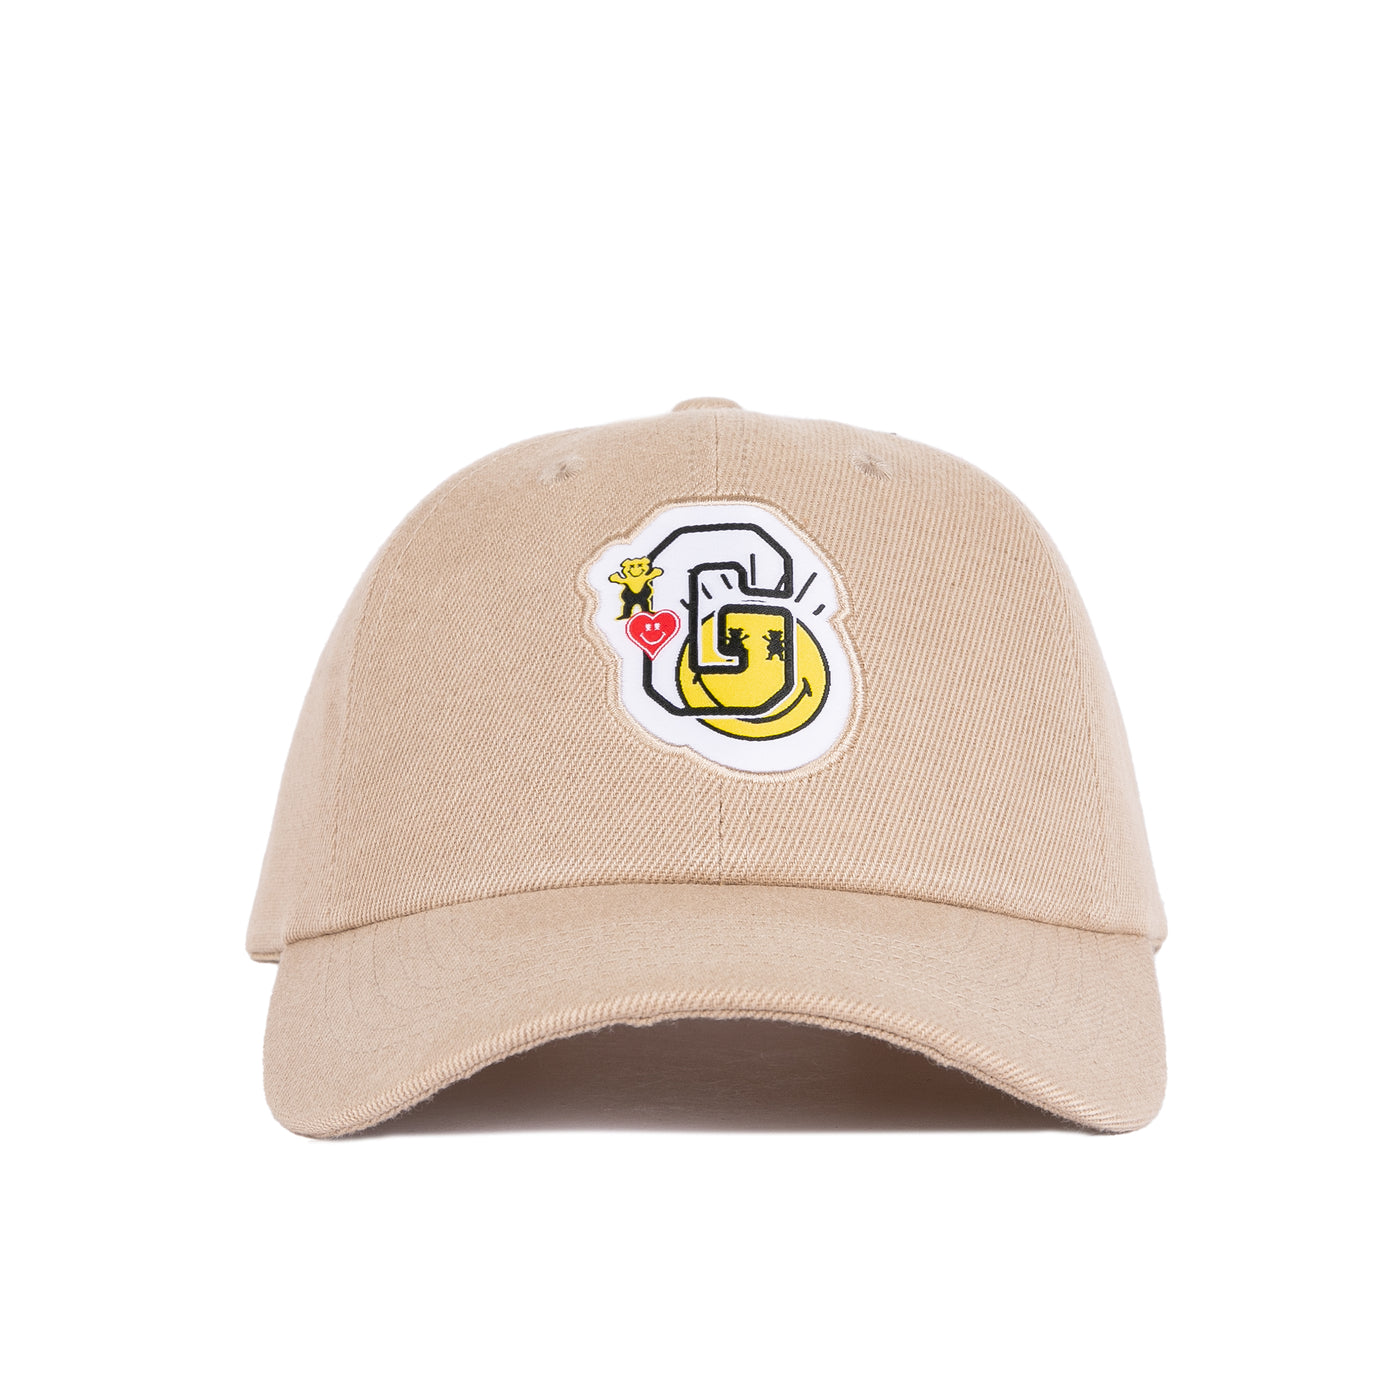 SMILEYWORLD Grizzly x Smiley World Dad Hat - Tan